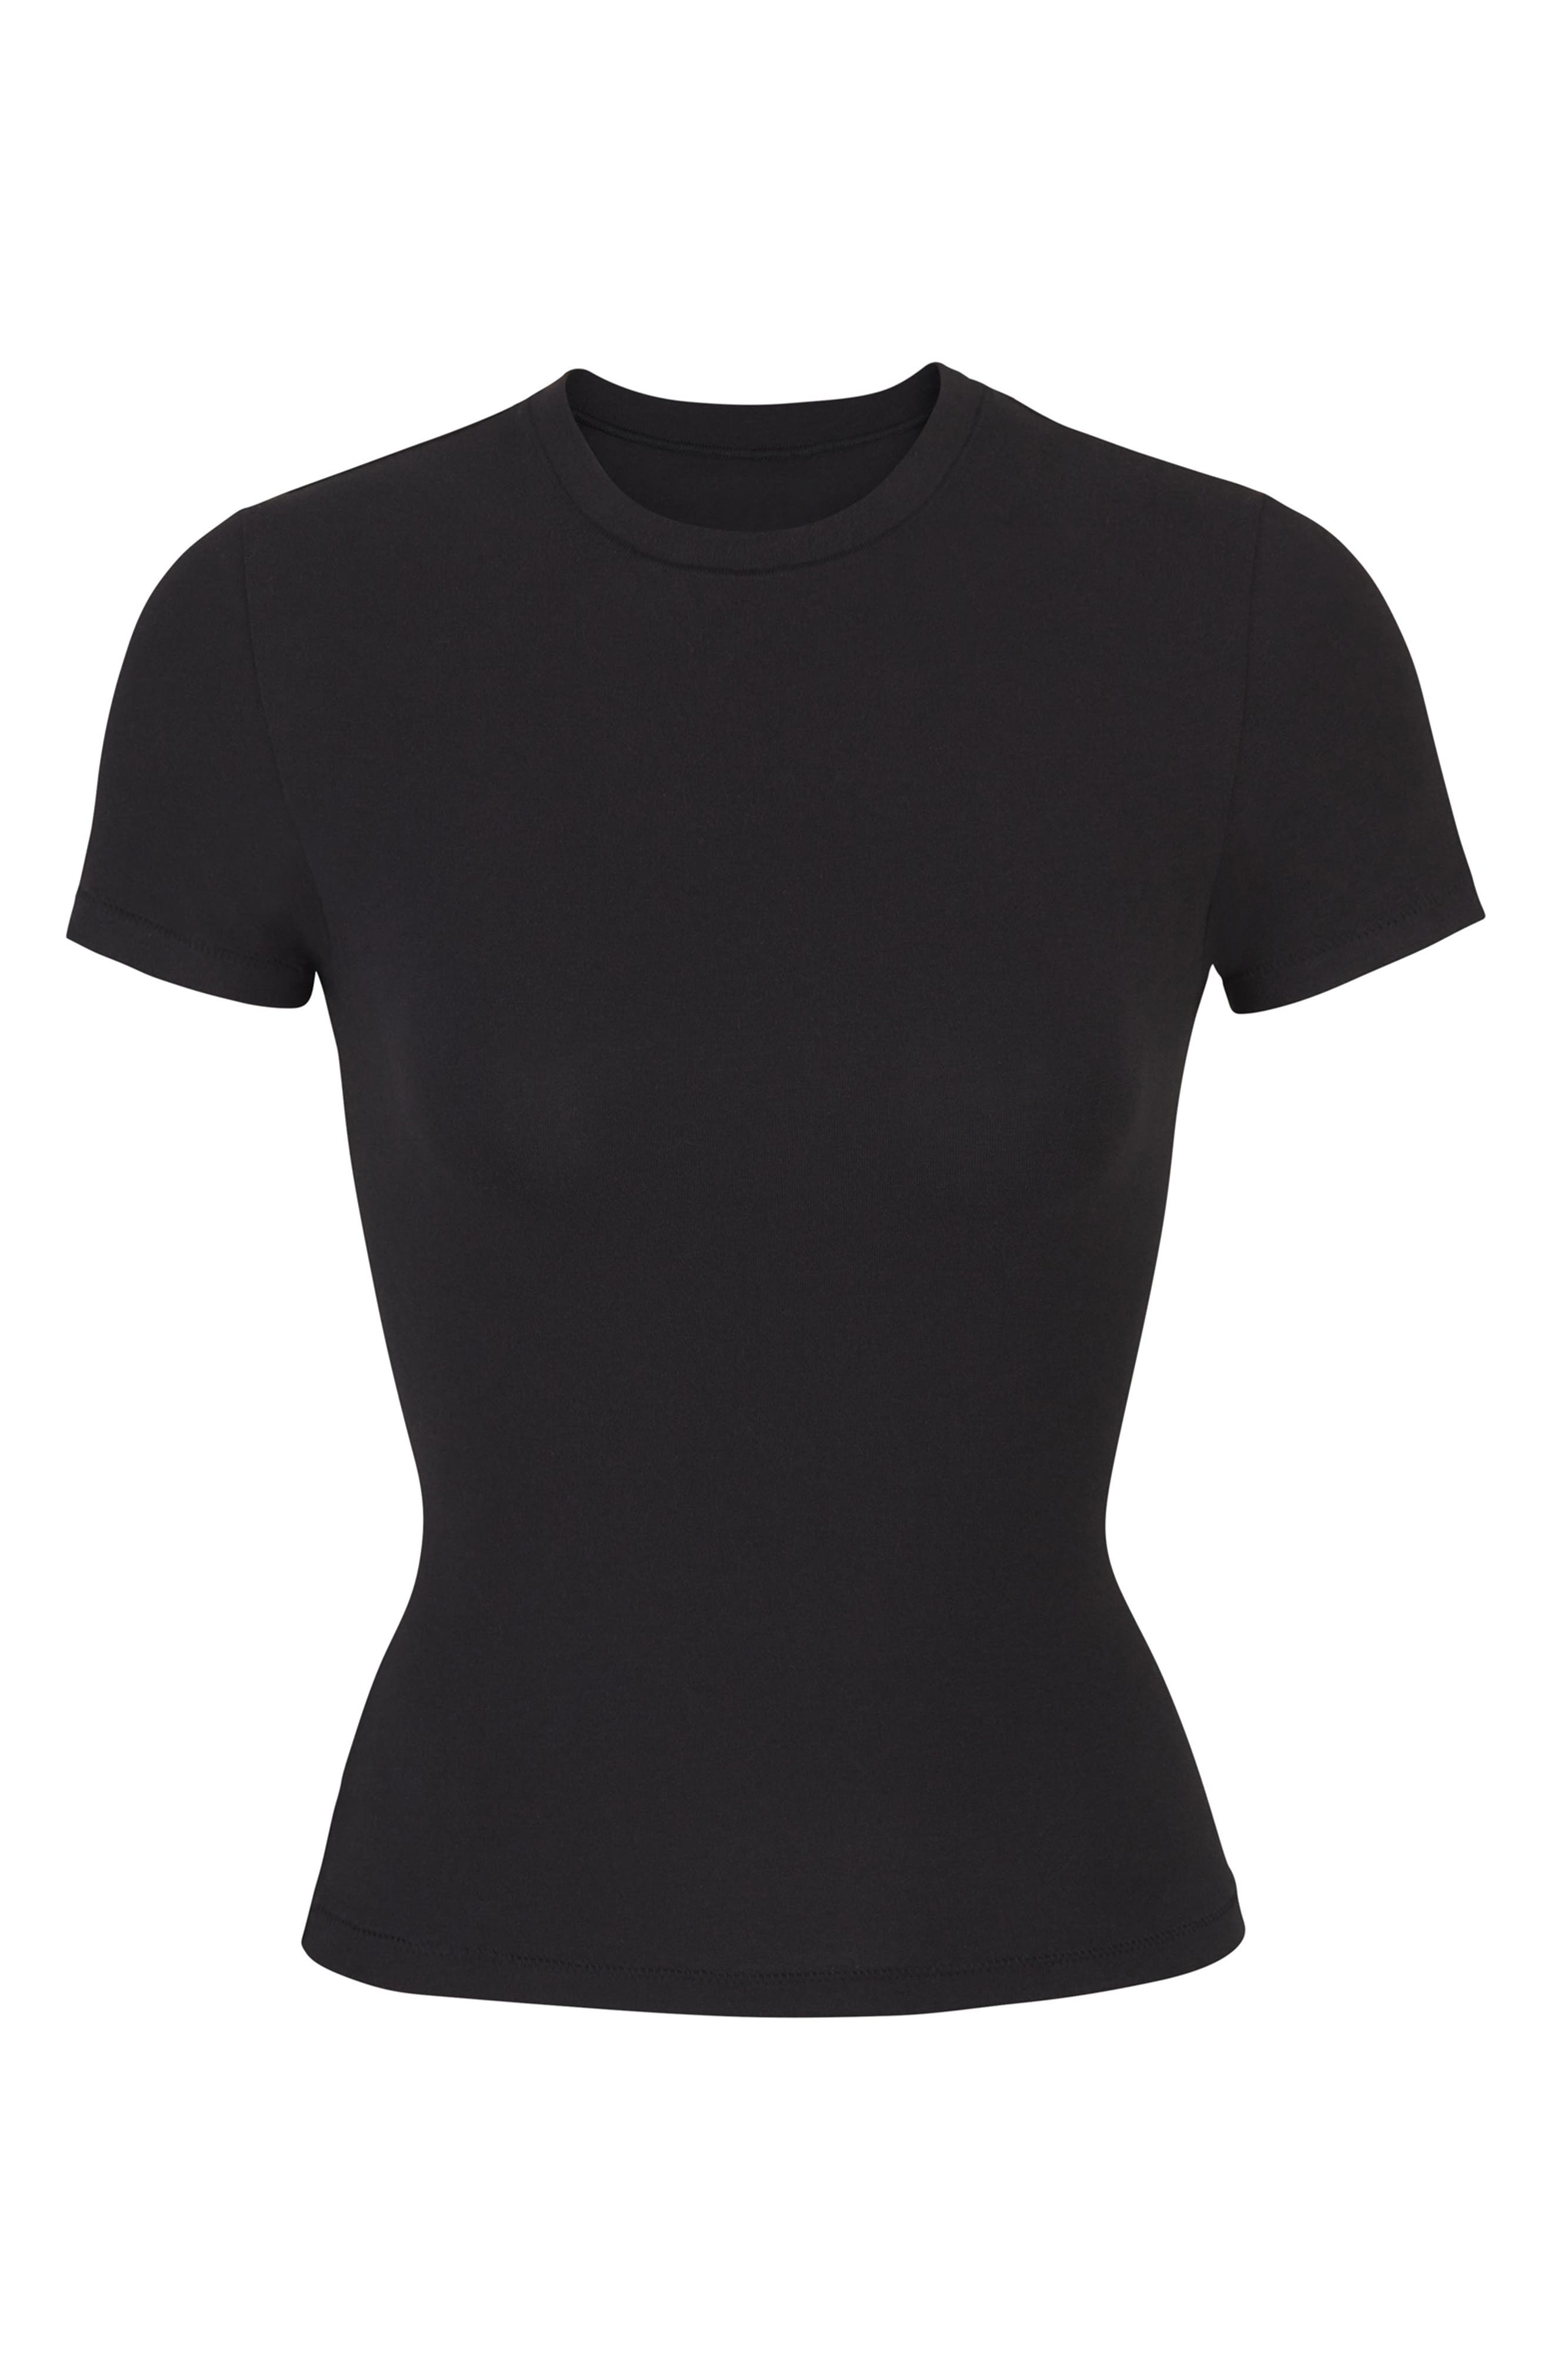 ***Brand New Ladies Women Short Sleeves Black Tops//T Shirts Size 12 to 34***